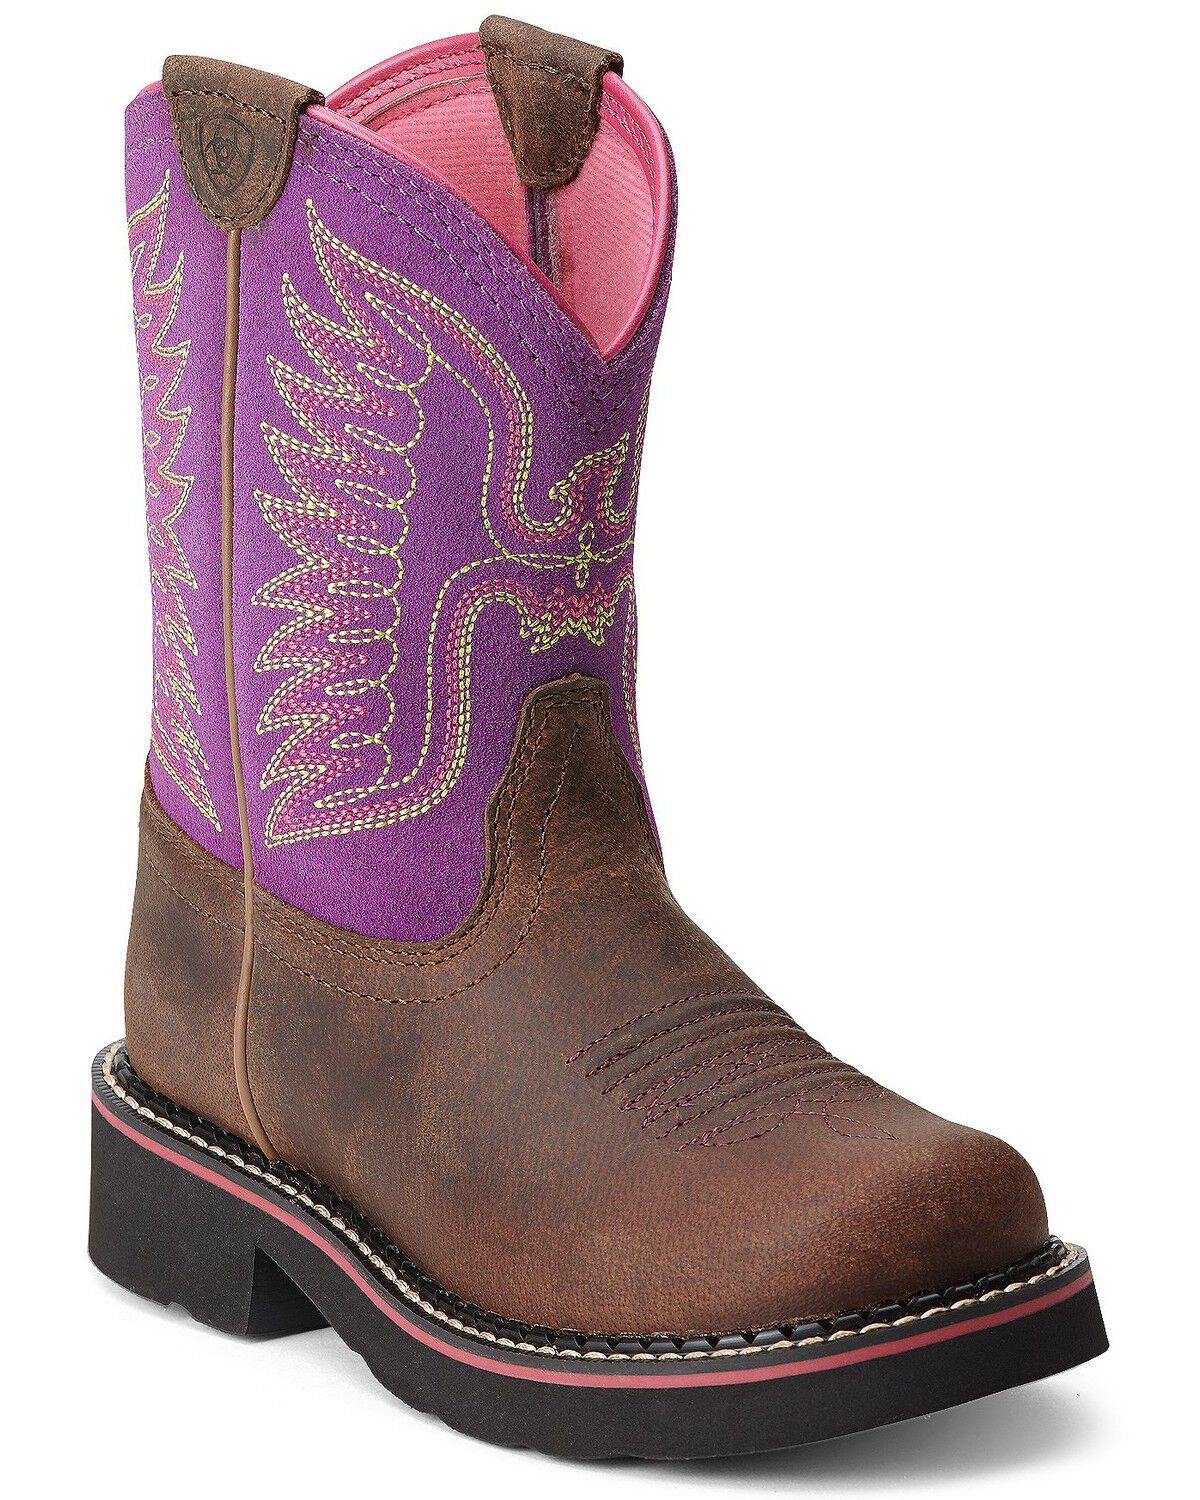 Details about   Girls ACME Pink Leather Cowboy Roper Boots Youth Size 9 Toddler 